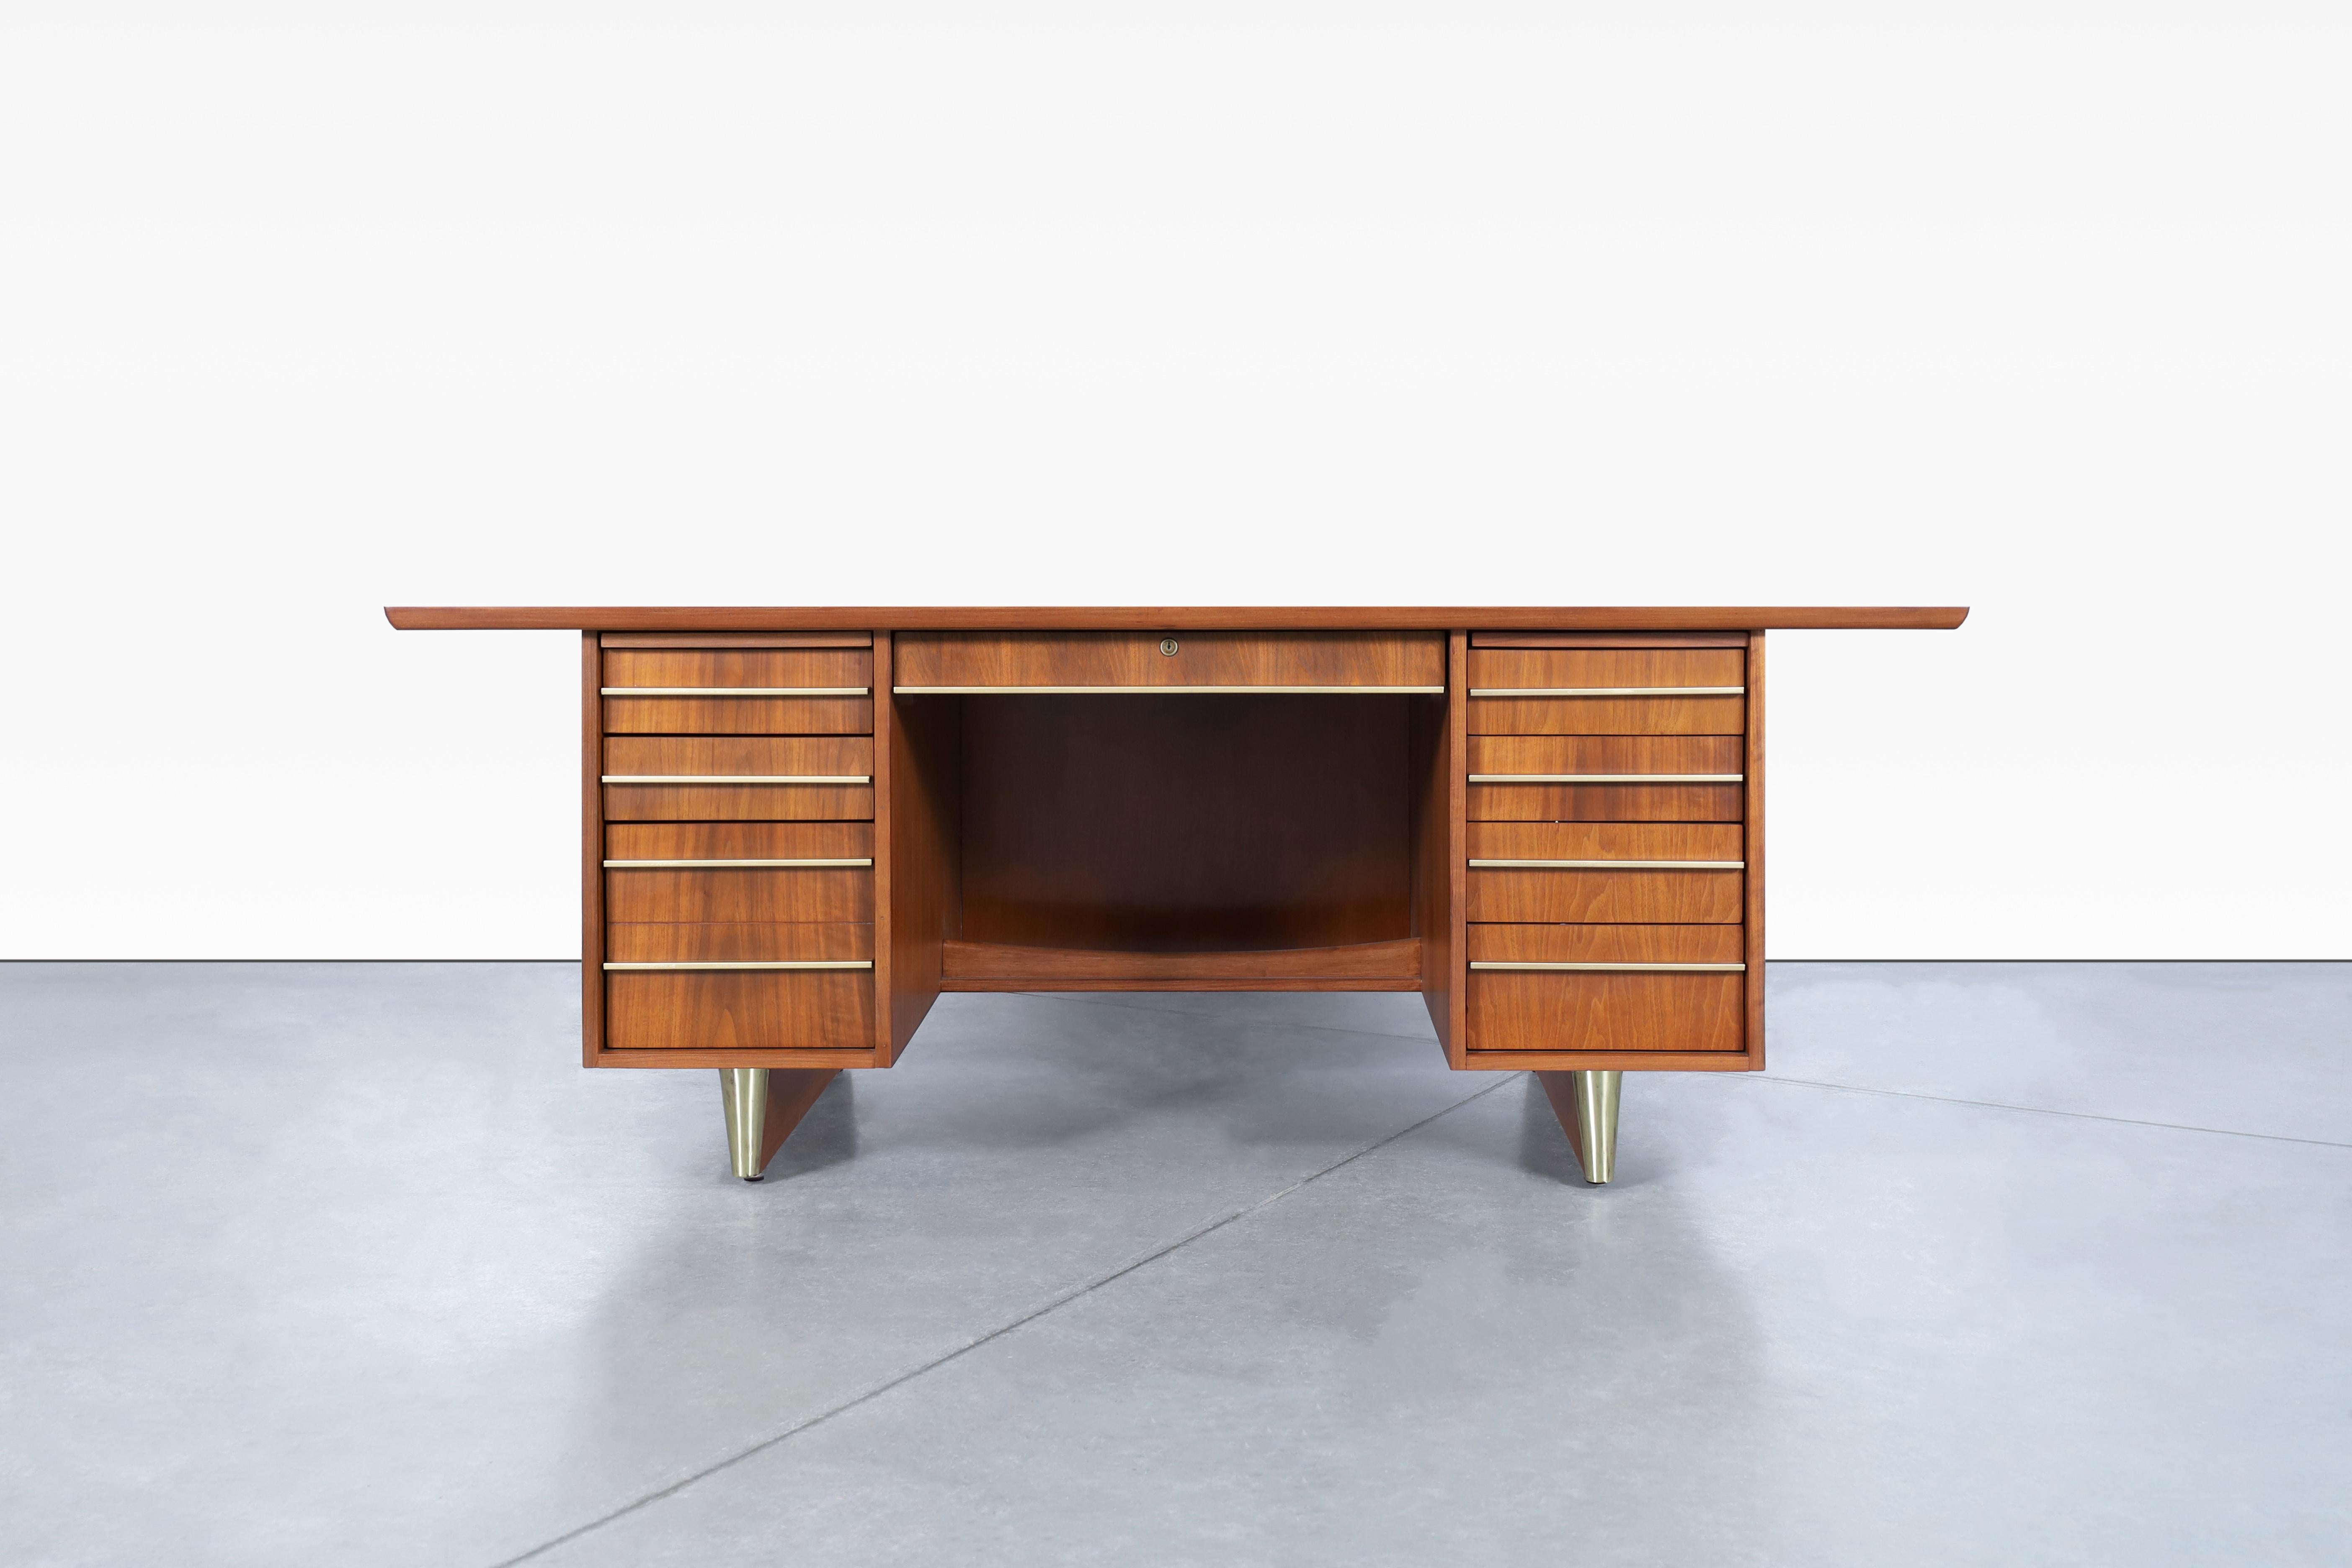 Stunning vintage executive brass and walnut desk, designed in USA, circa 1950’s. Crafted with meticulous attention to detail, this desk features meticulous design and minimalist brass handles. Designed with functionality in mind, it has six dovetail